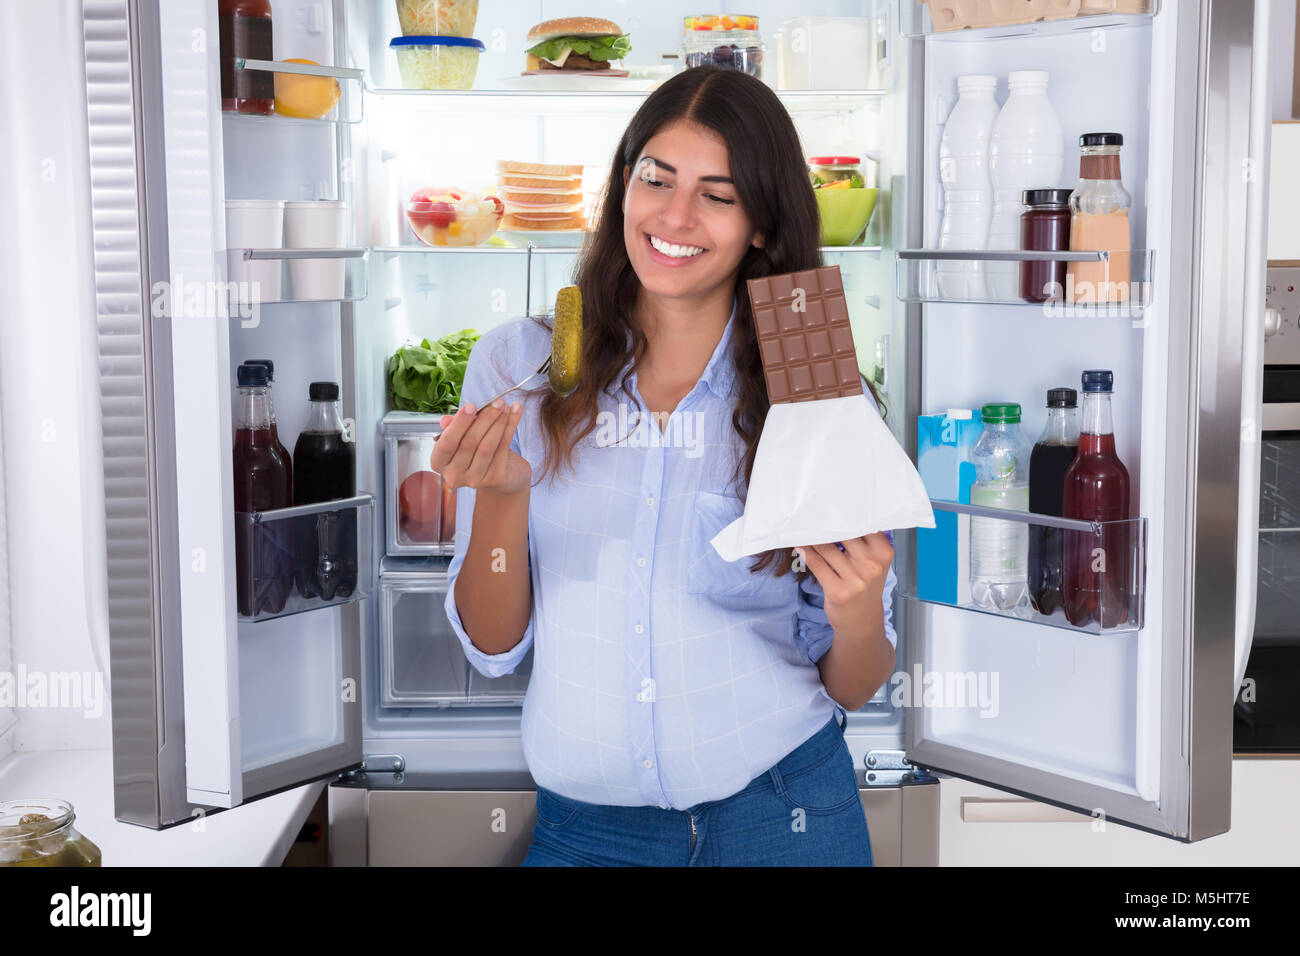 Young Woman Eating Chocolate Near Open Refrigerator Stock Photo